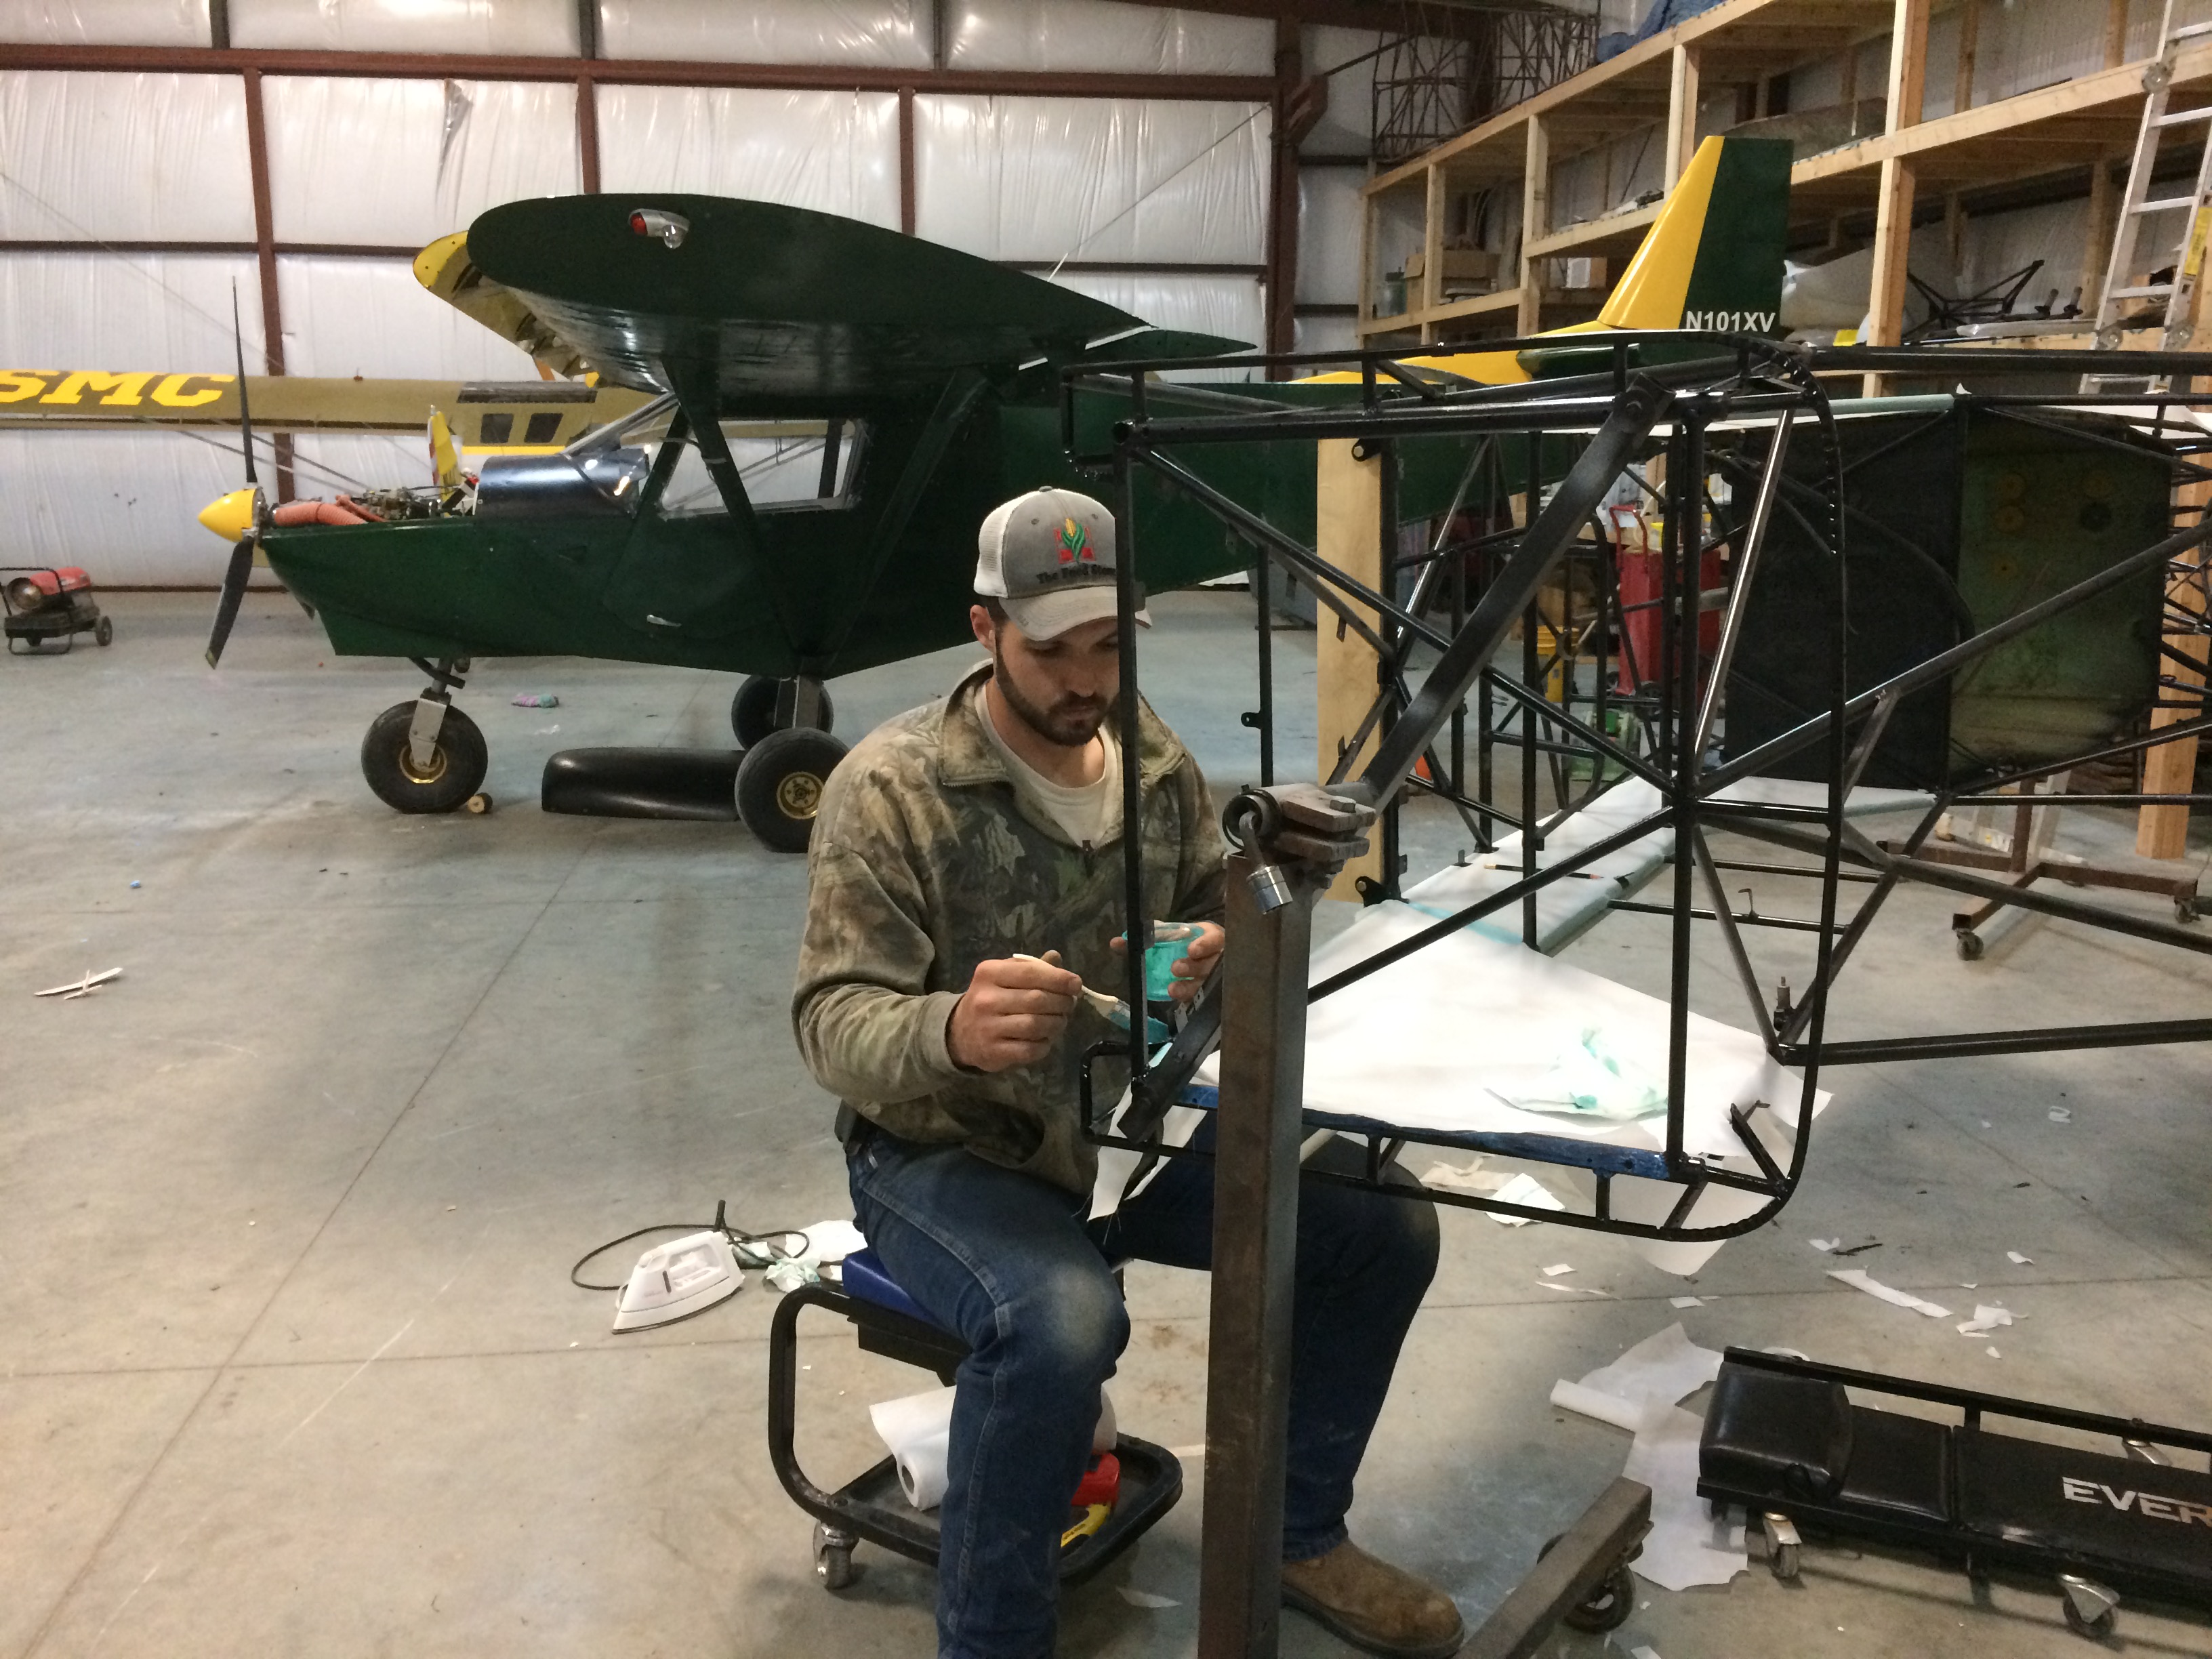 STOL Creek Aviation - Maintenance and Repair and certified Dealer of Rotax Aircraft Engines